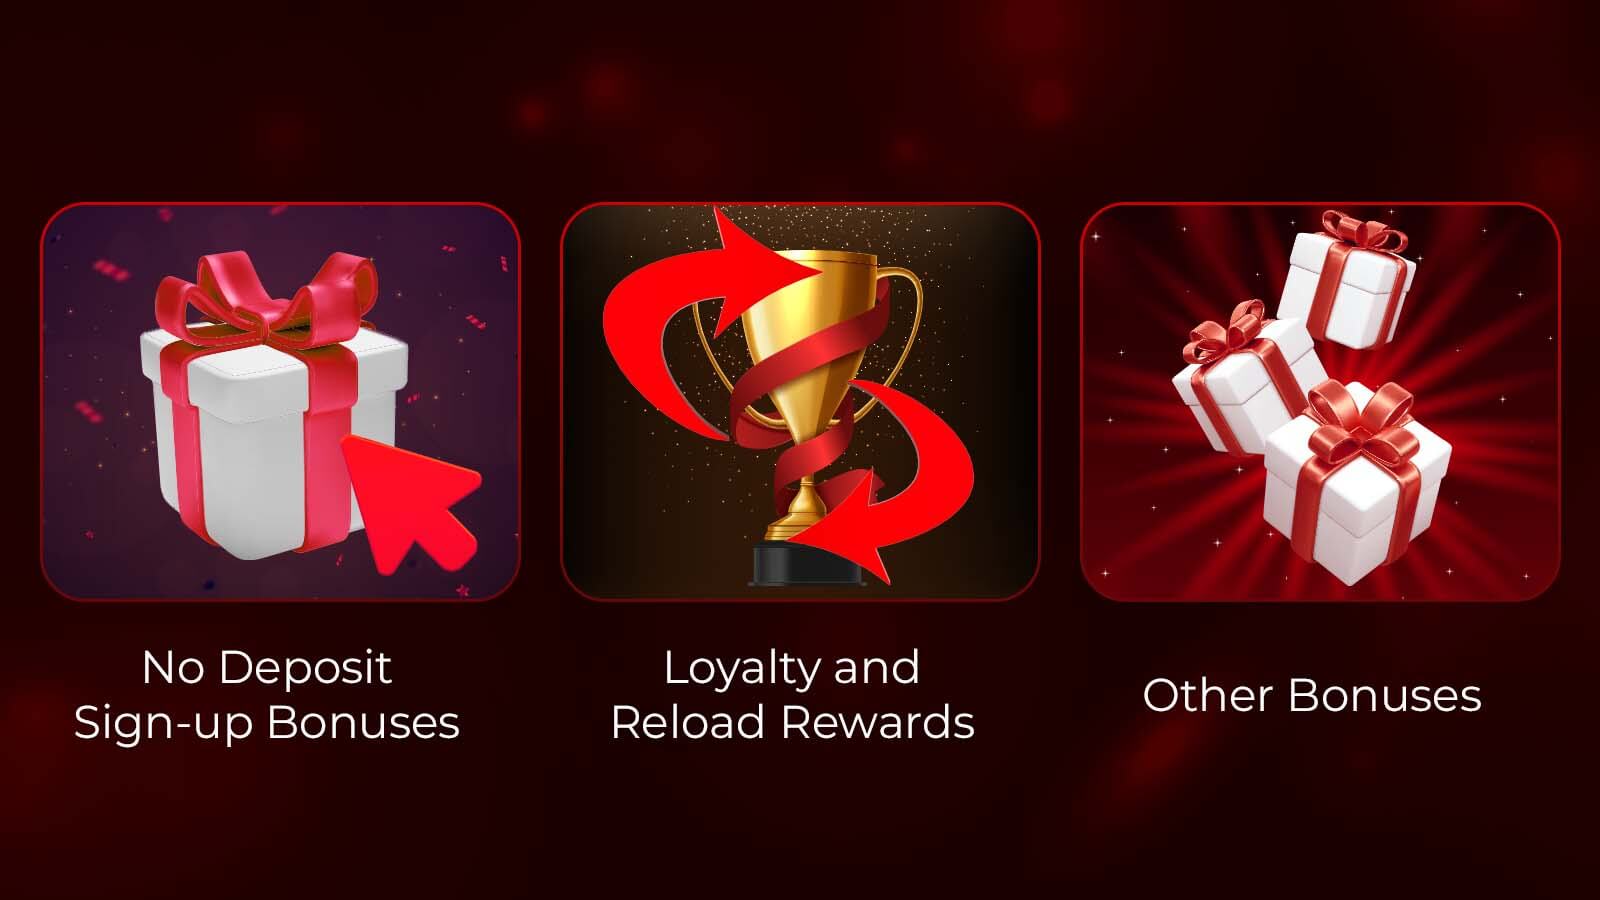 Loyalty and Reload Rewards